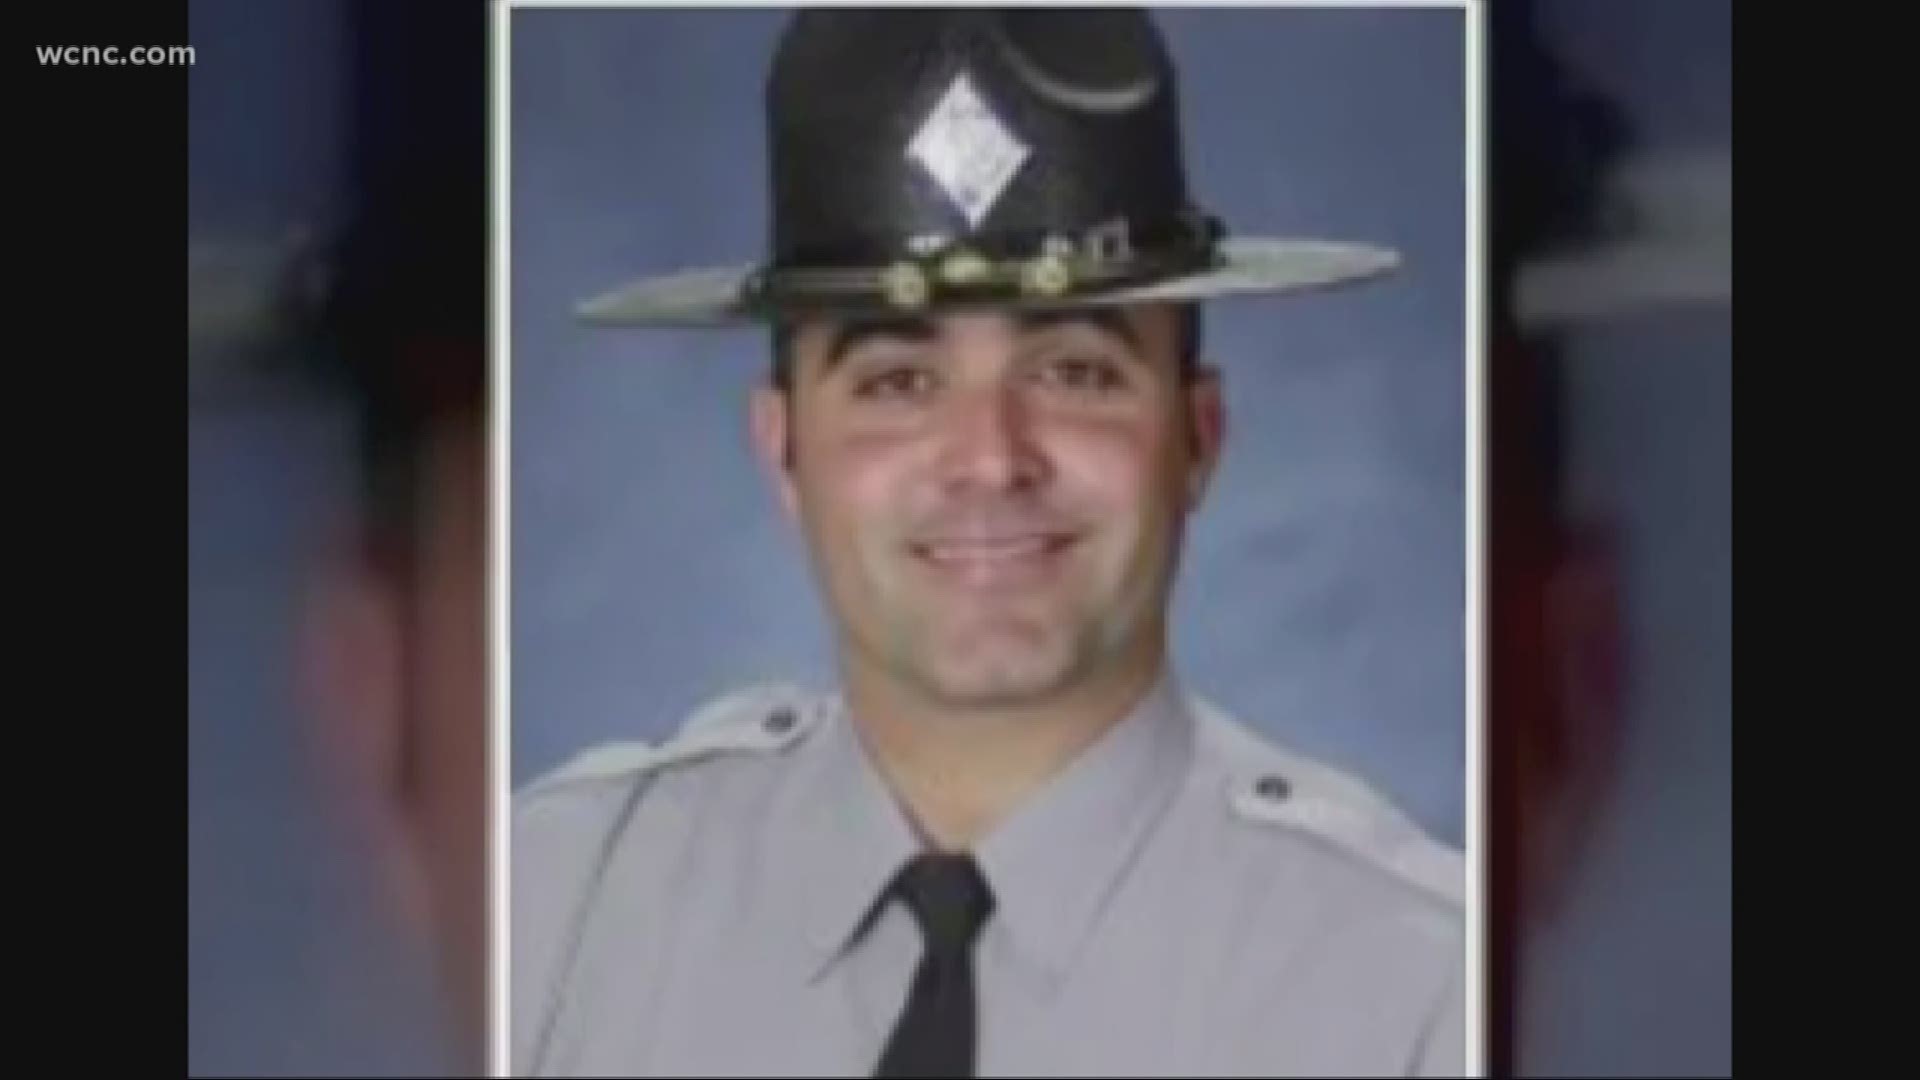 Trooper Kevin Conner was shot and killed during a traffic stop in Columbus County early Wednesday, Highway Patrol confirmed.